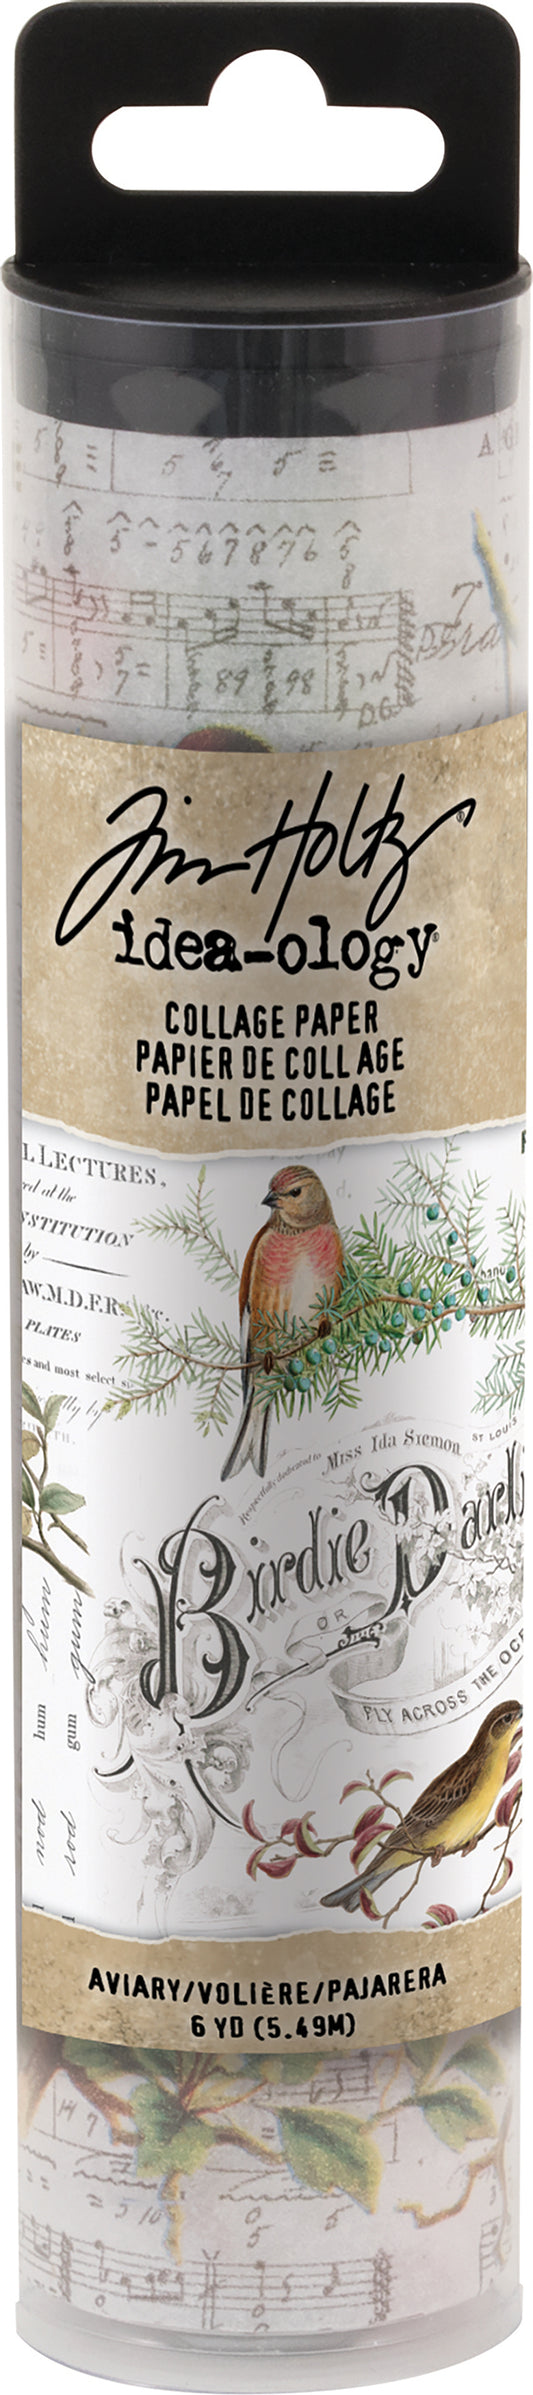 Collage Paper - Aviary - Ideaology - Tim Holtz